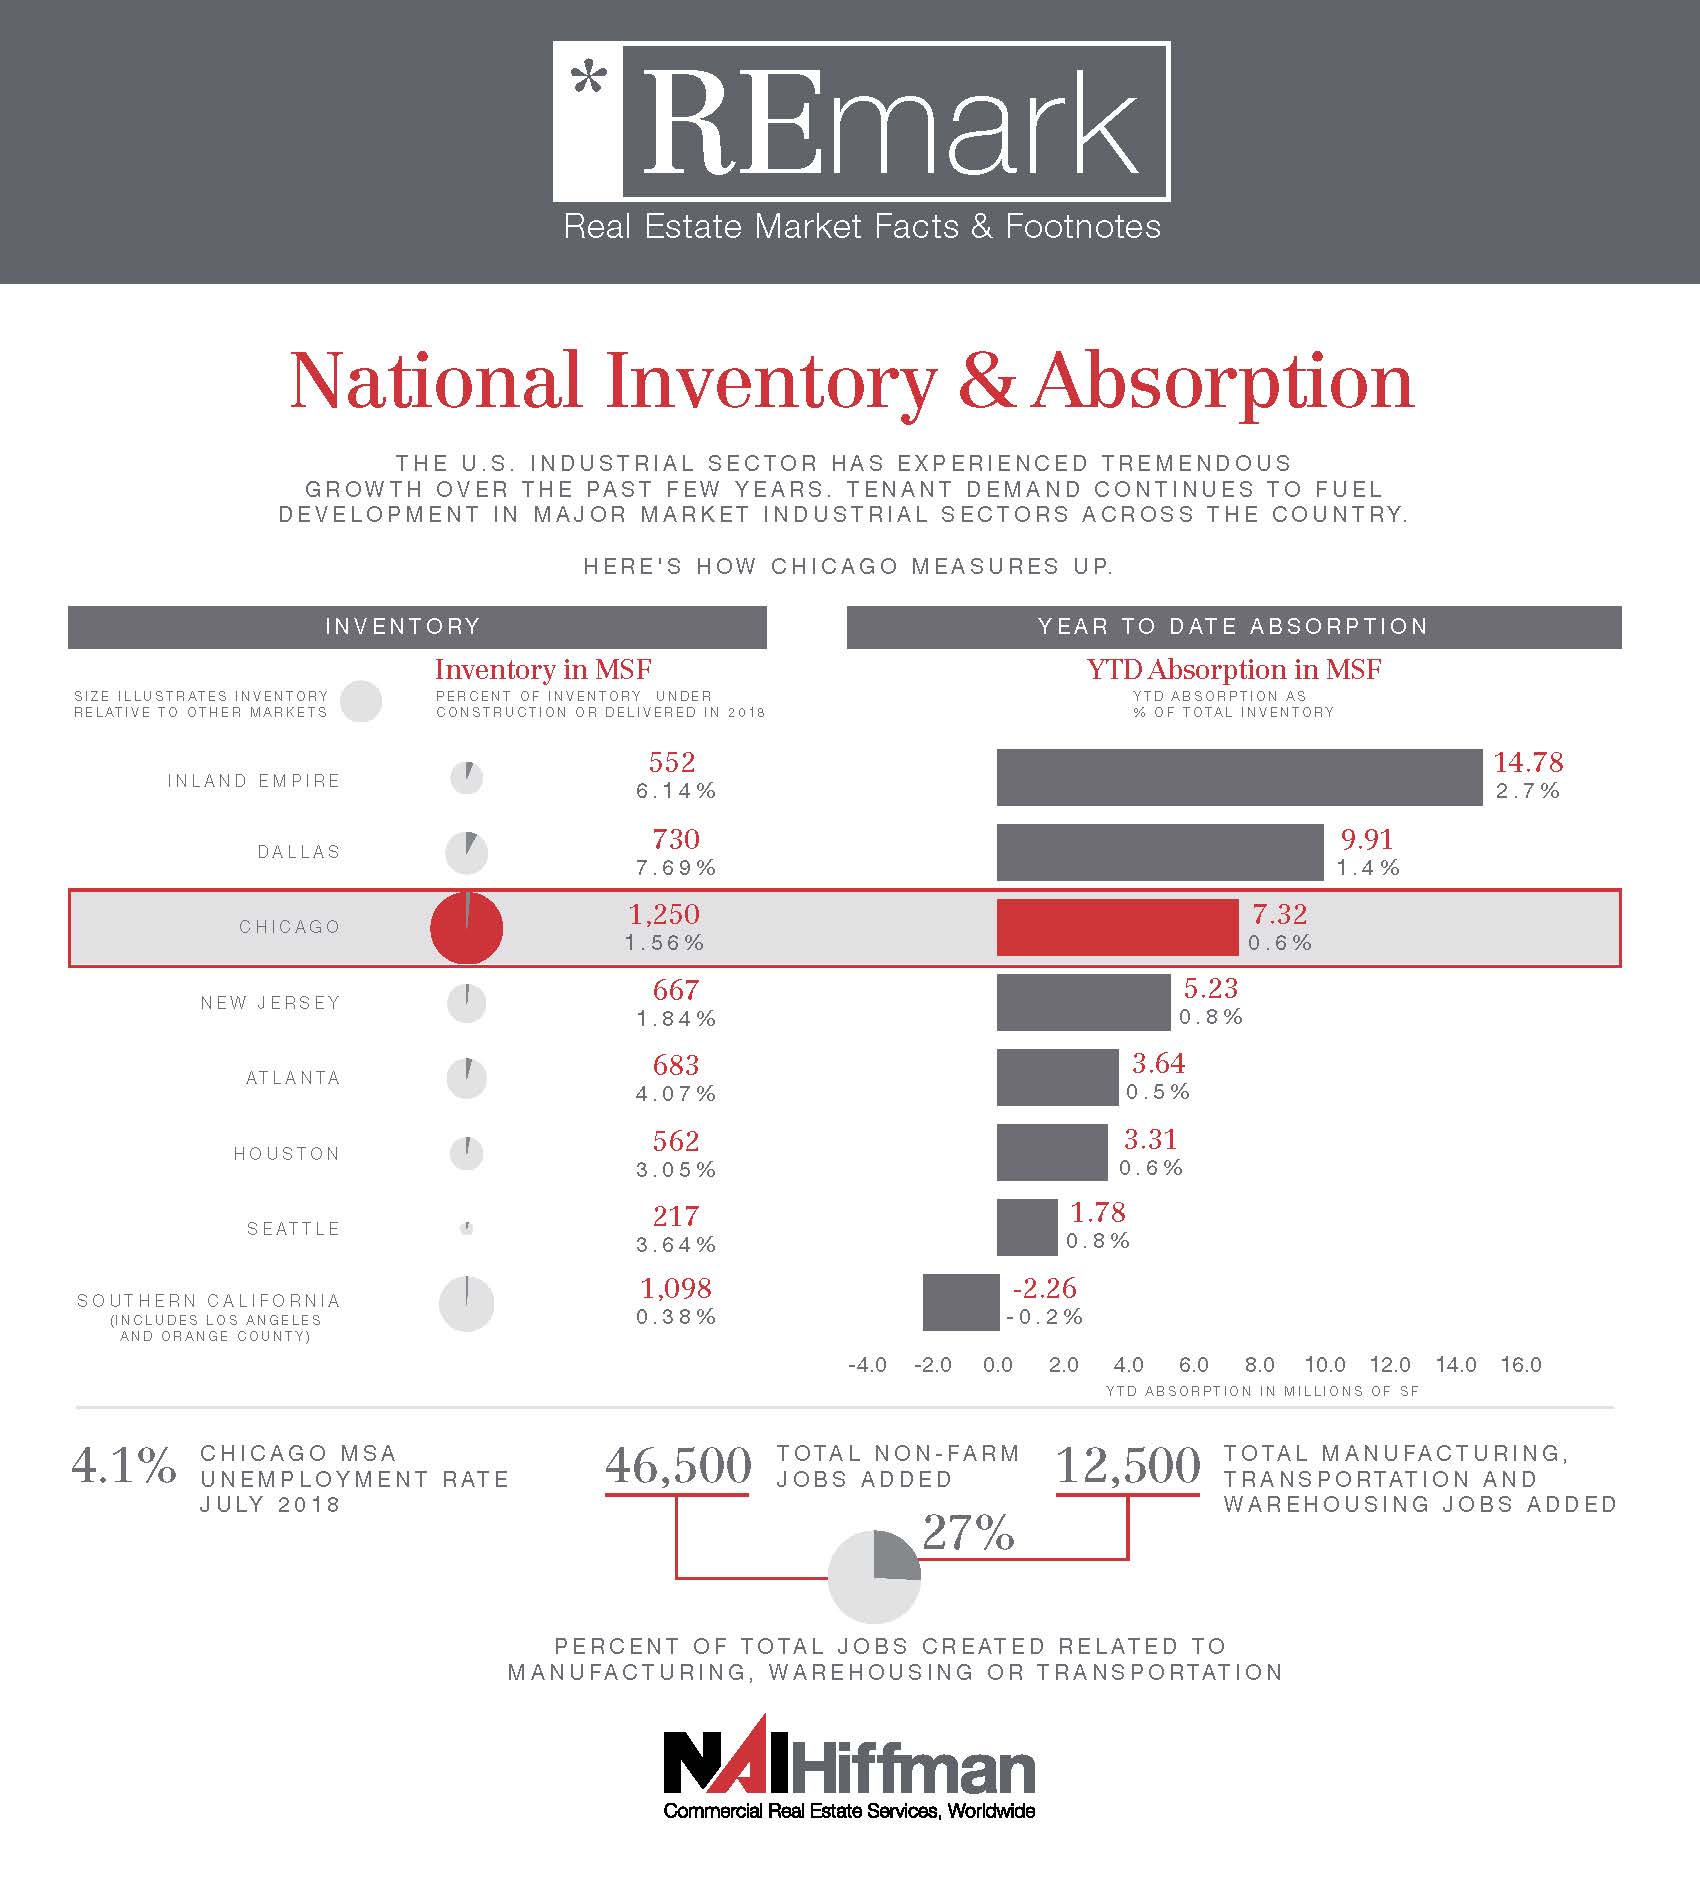 National Industrial Inventory & Absorption